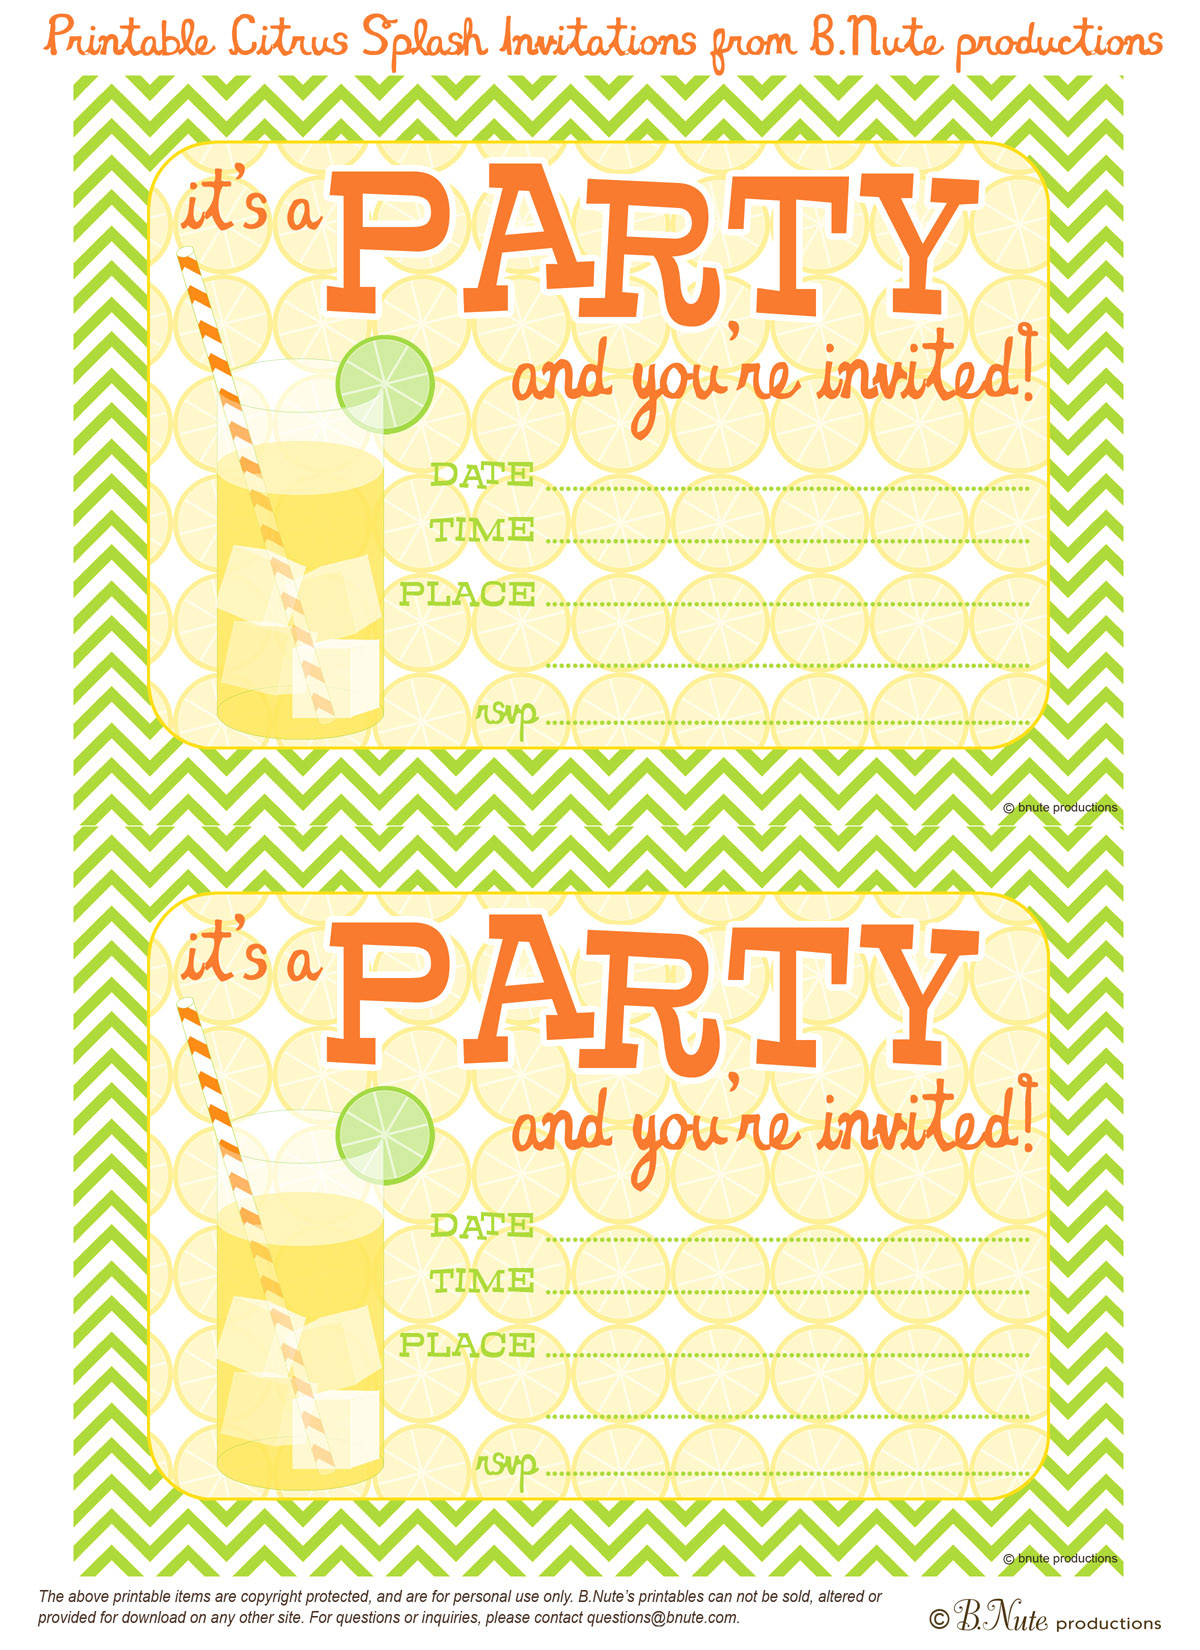 Best ideas about Free Printable Birthday Invitations
. Save or Pin bnute productions Free Printable Citrus Splash Invitations Now.